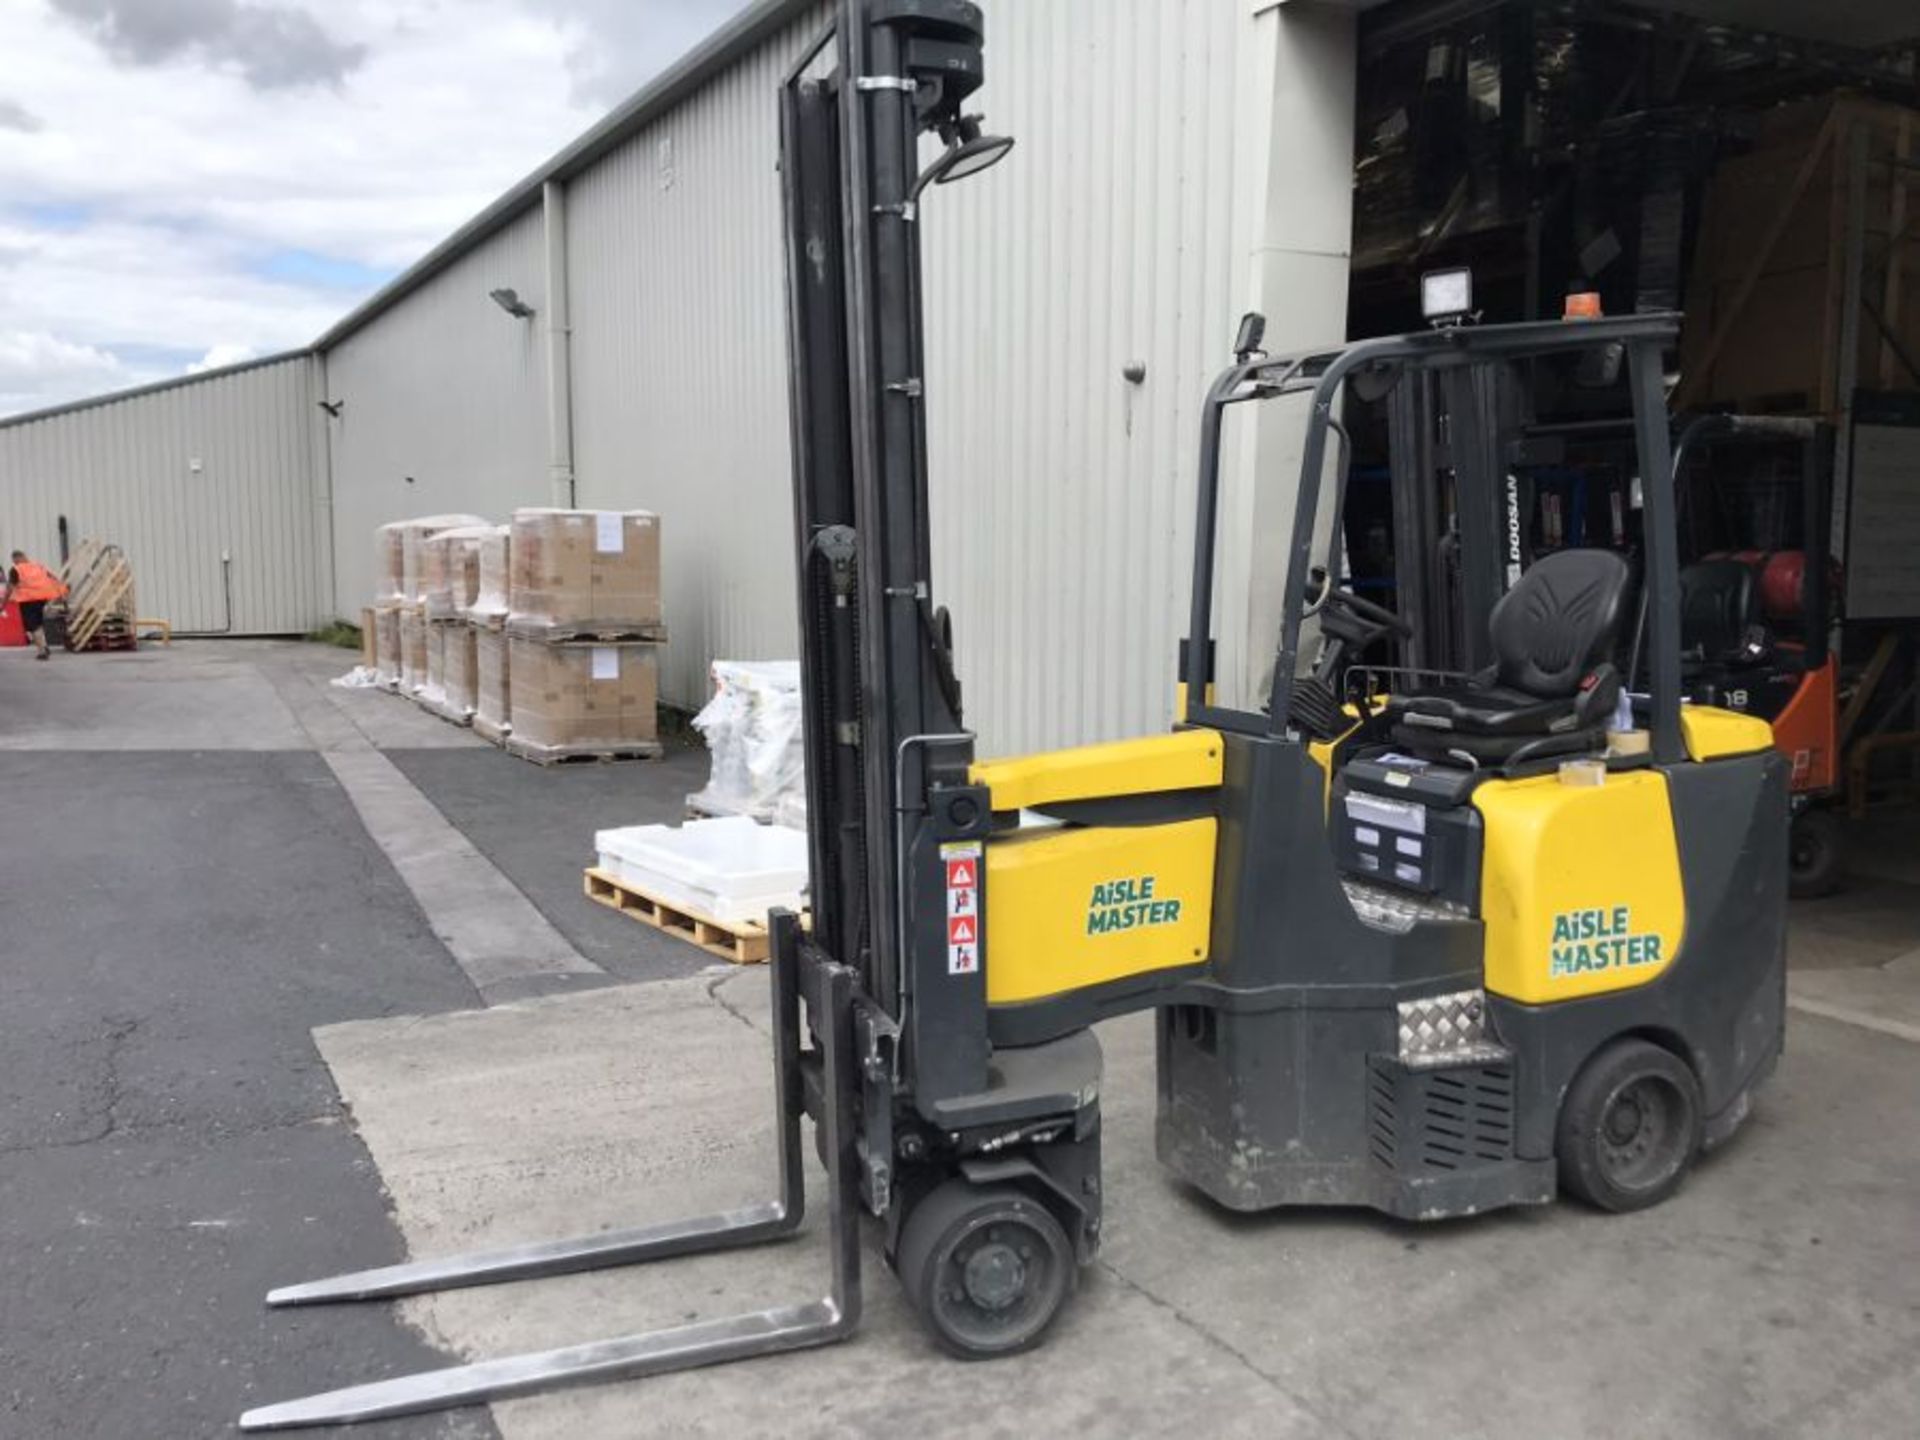 Aisle-Master 15 SE 1,500kg electric articulated fork lift truck (2018) - Image 3 of 8